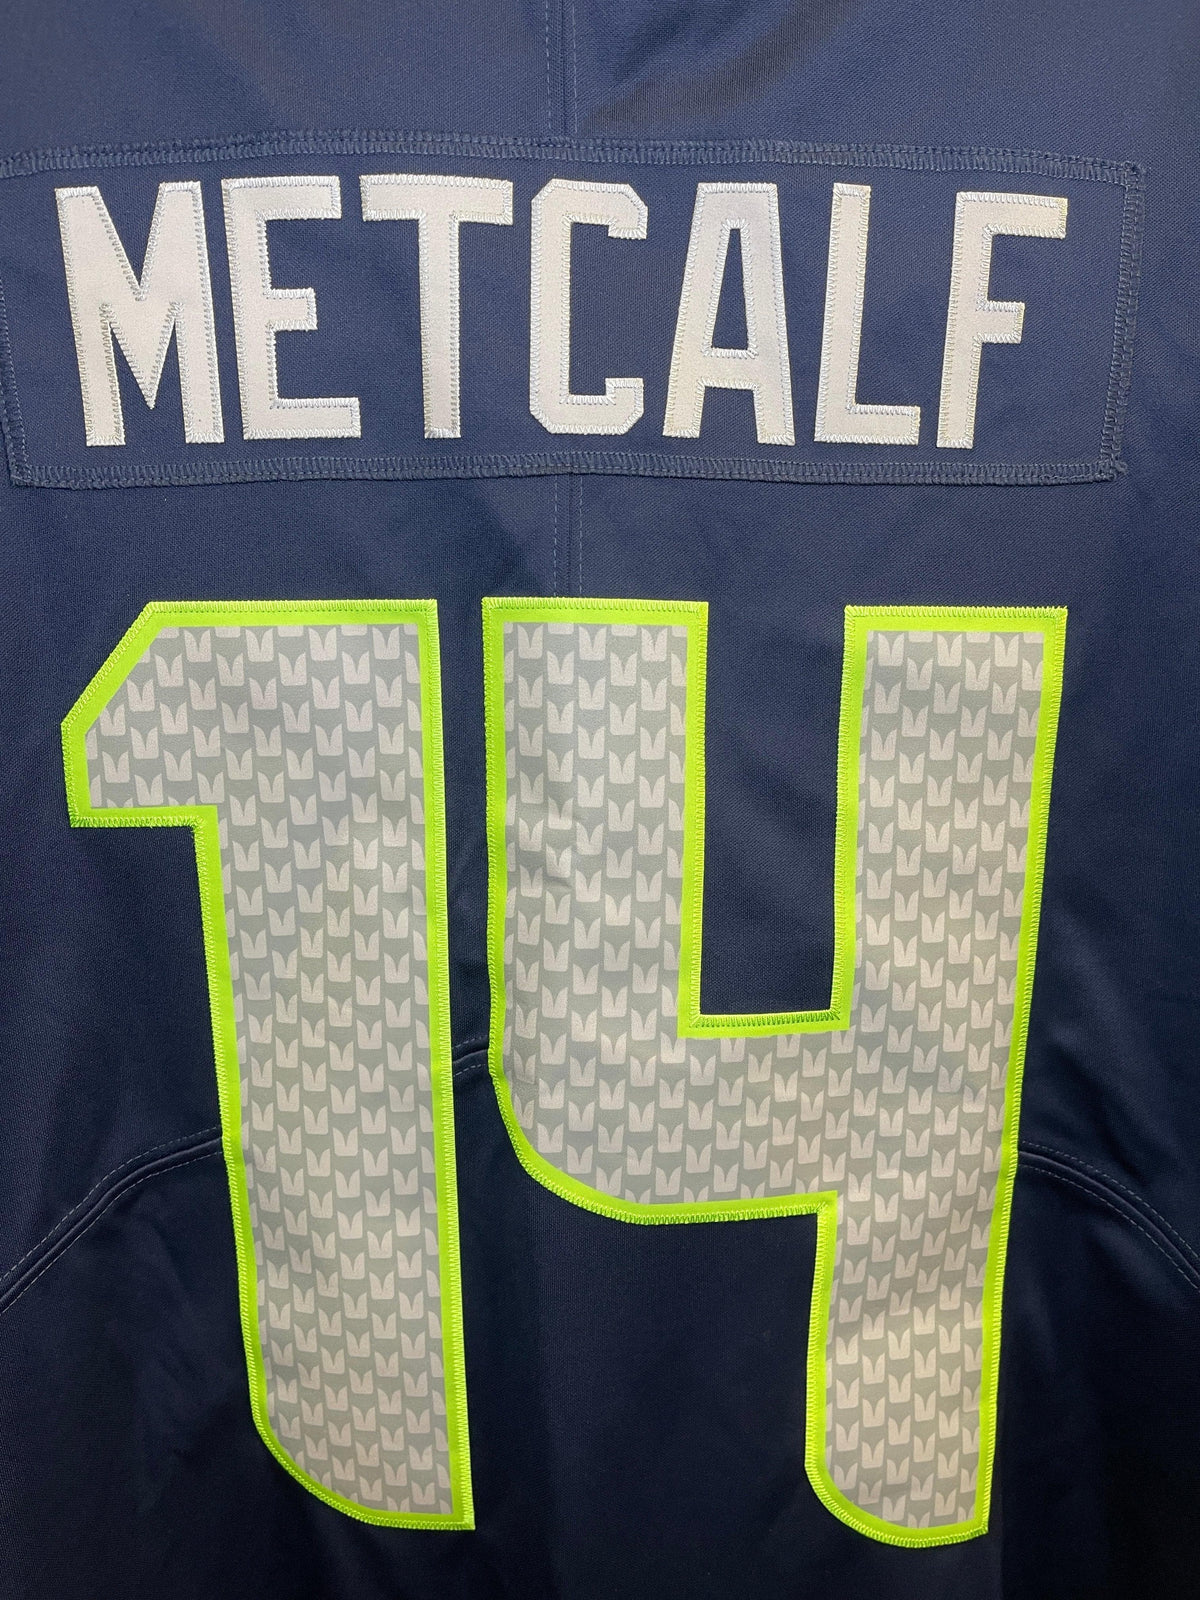 NFL Seattle Seahawks Metcalf #14 Limited Jersey Men's 3X-Large NWT